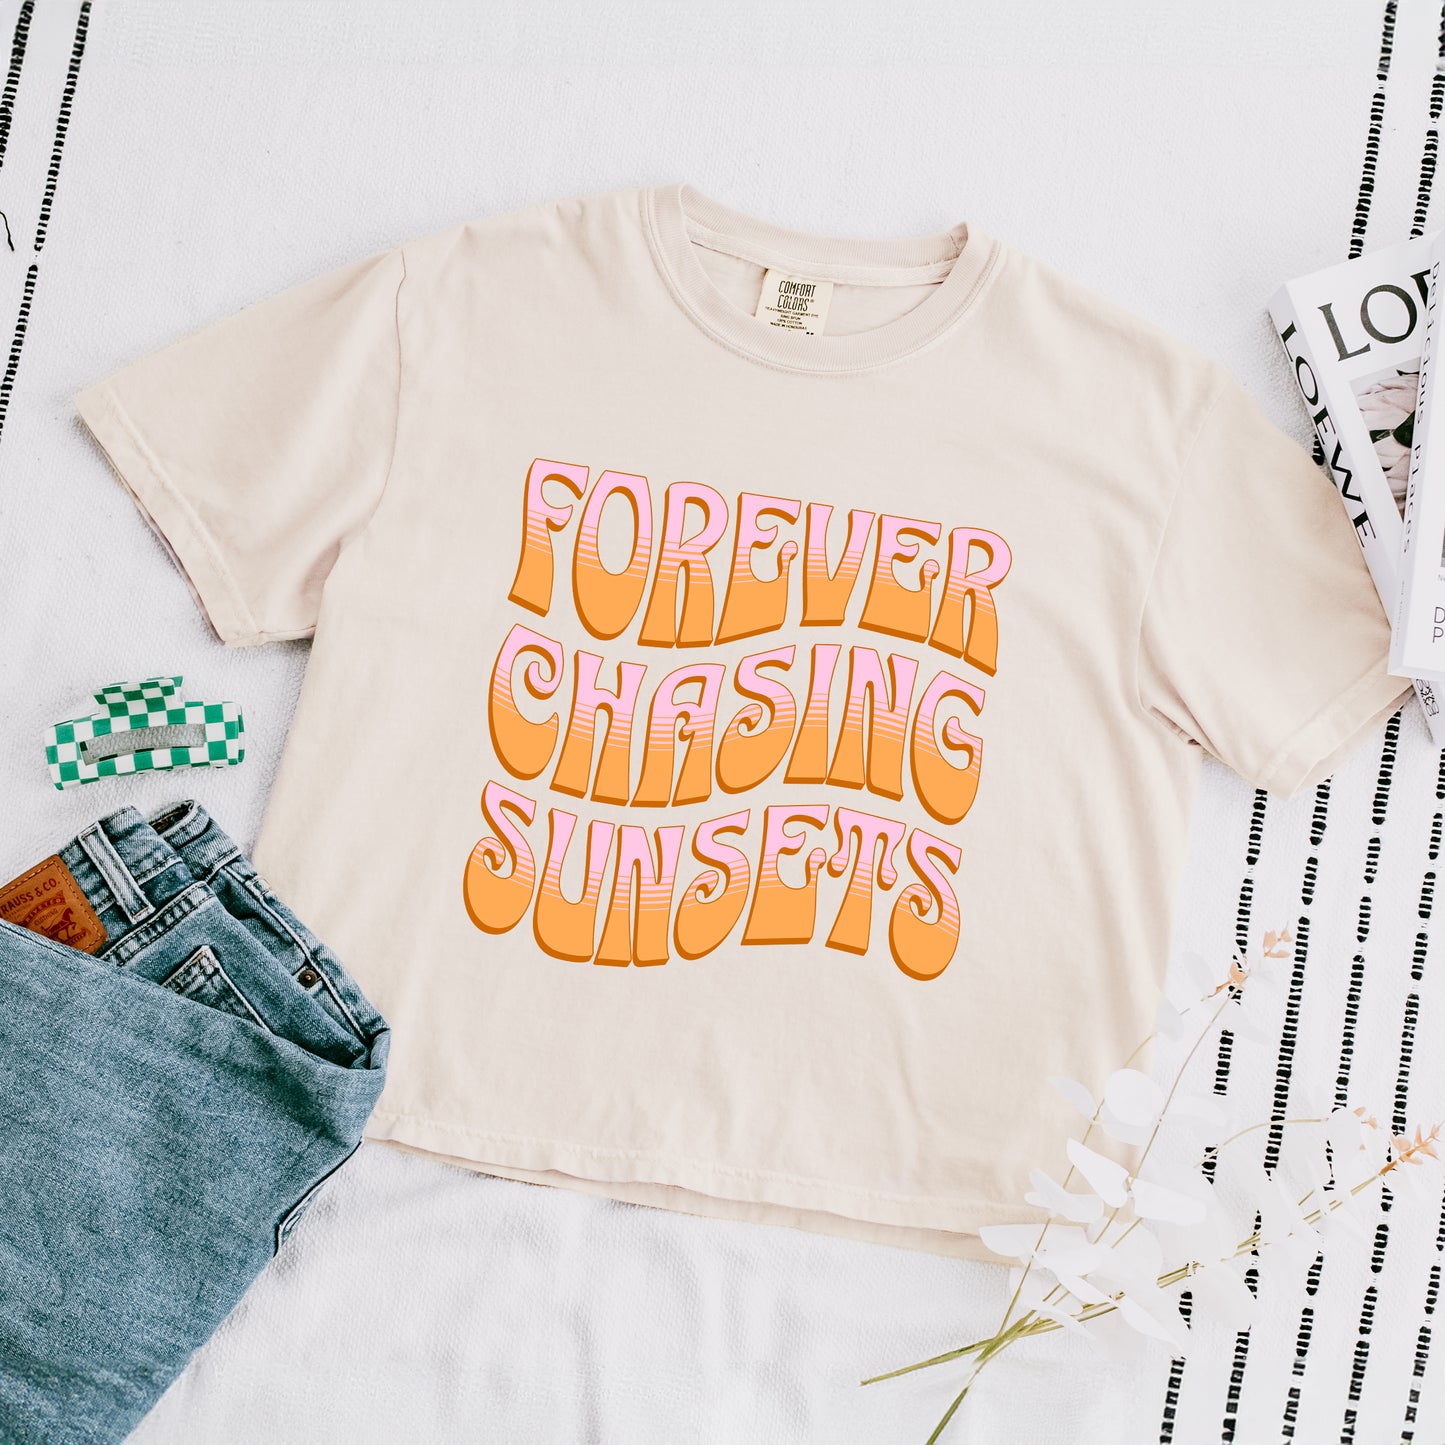 Forever Chasing Sunsets Wavy | Relaxed Fit Cropped Tee